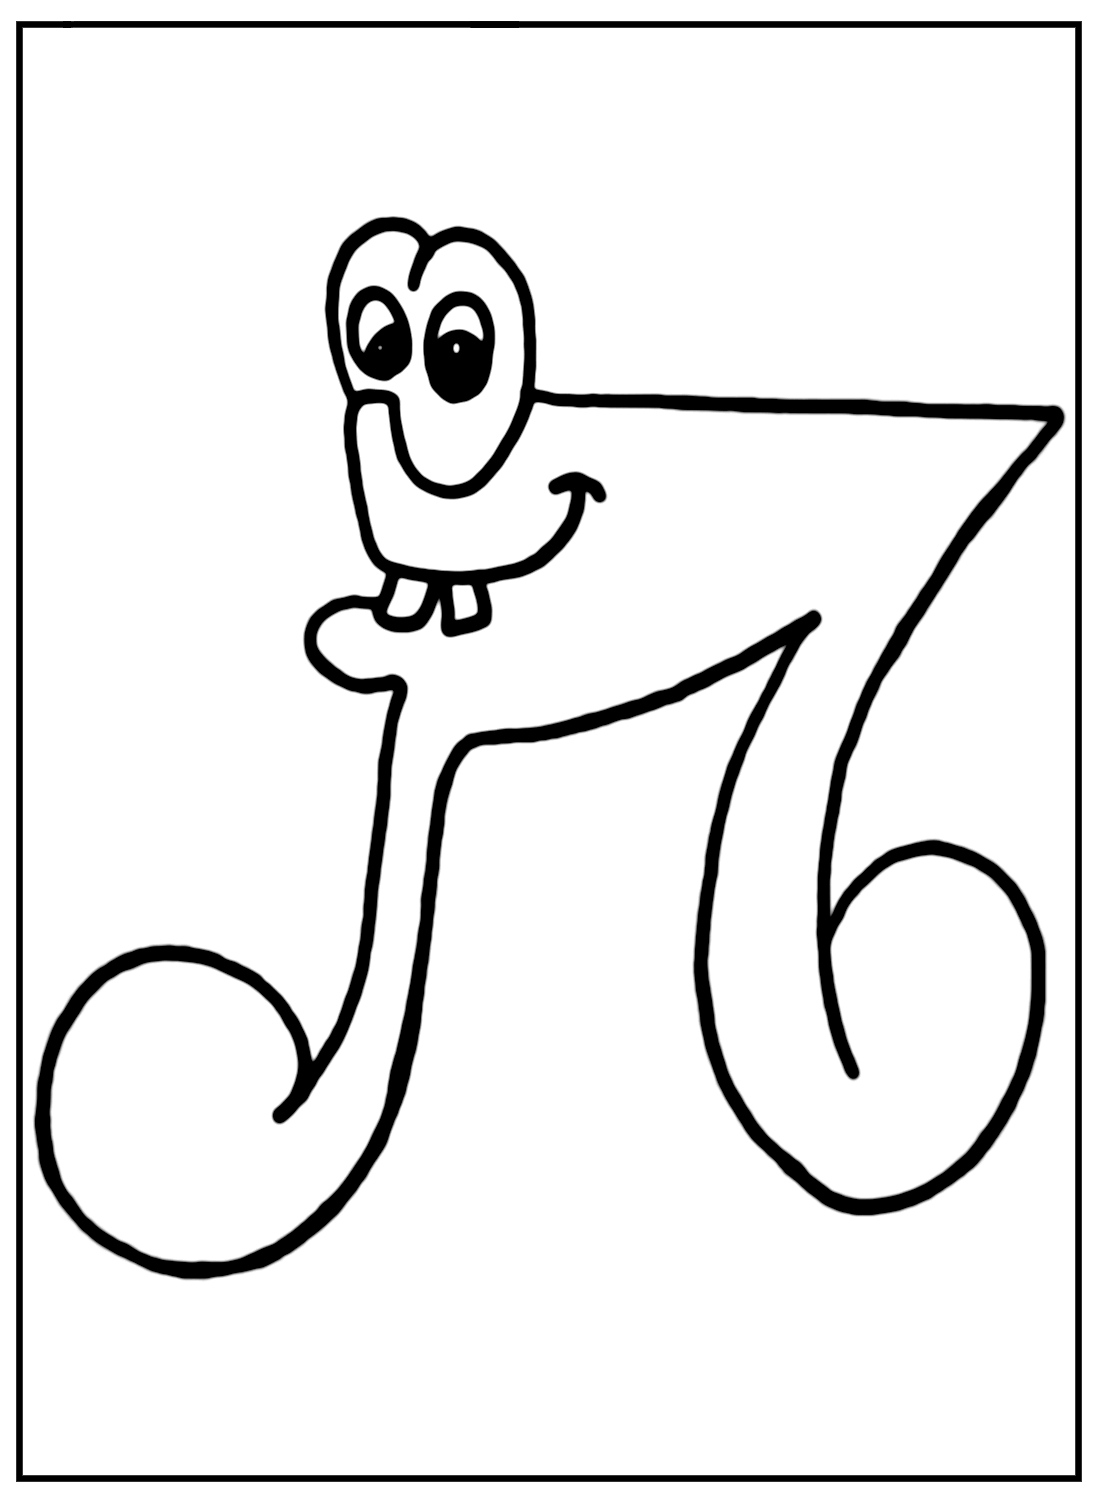 Music Note Cartoon Coloring Page